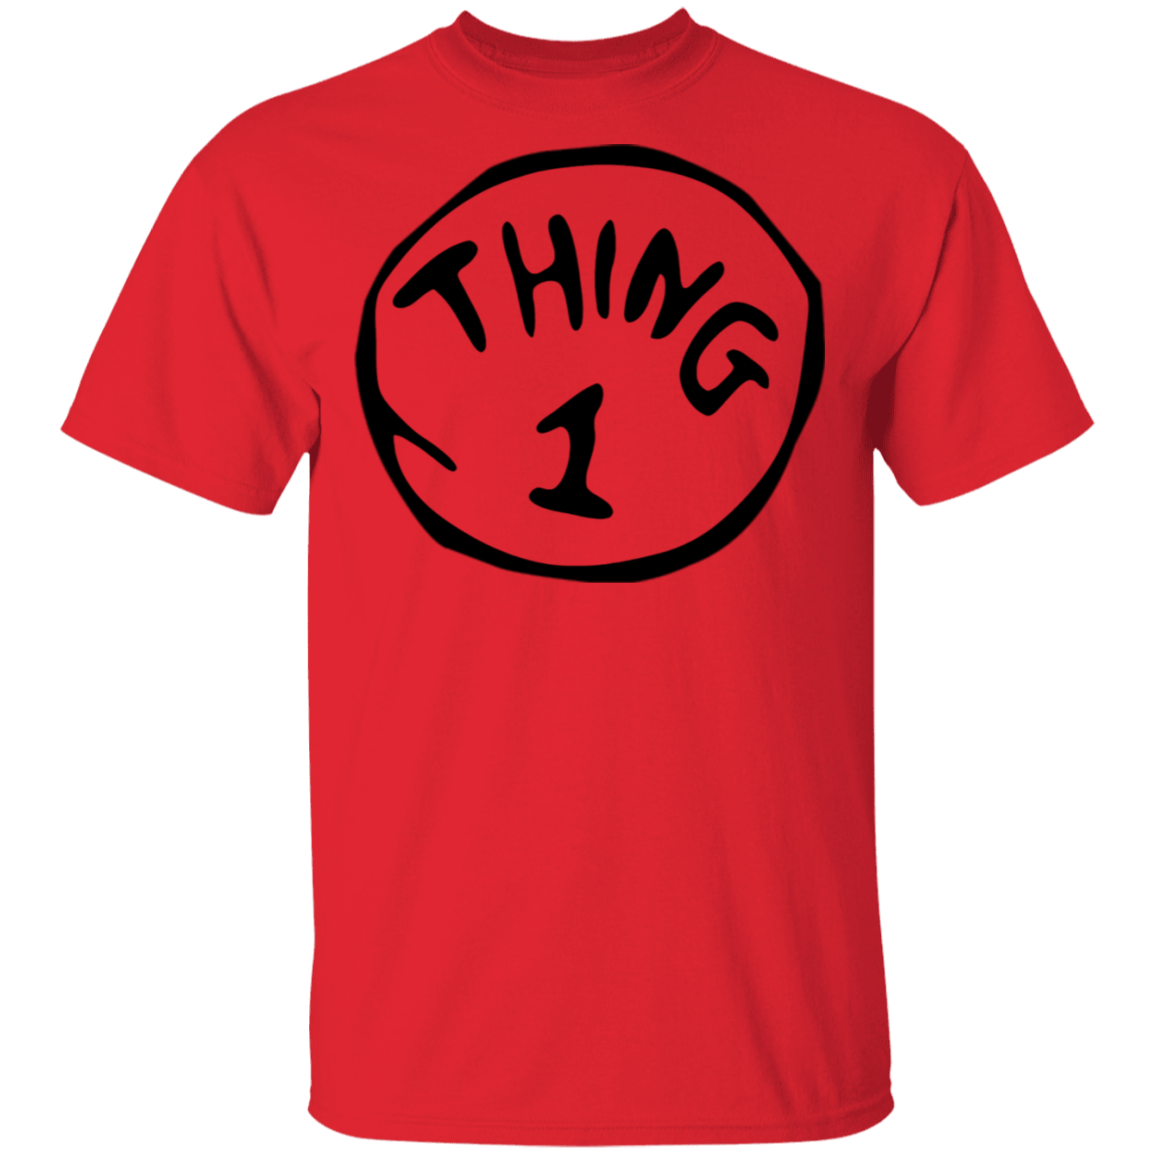 thing-1-and-thing-2-shirt-dr-seuss-day-thing-one-shirt-for-men-women